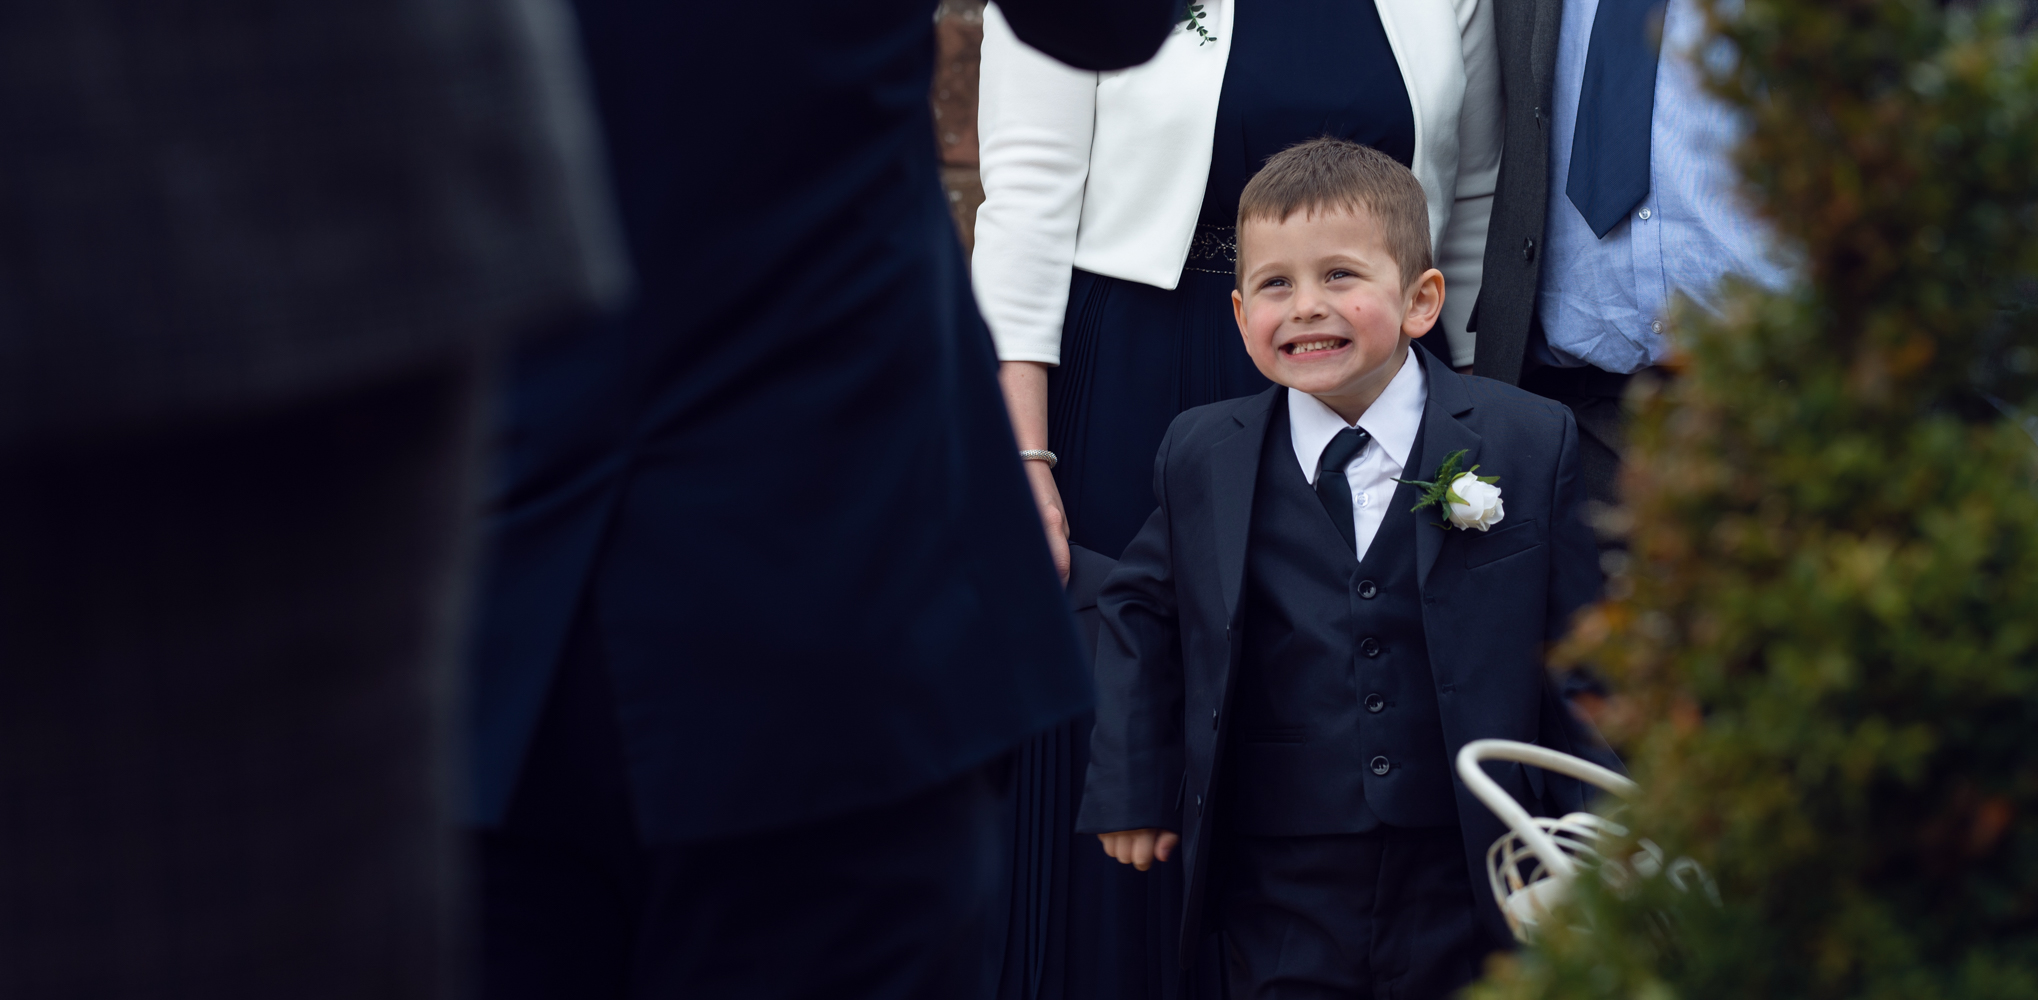 A young boy having a giggle outside the wedding venue